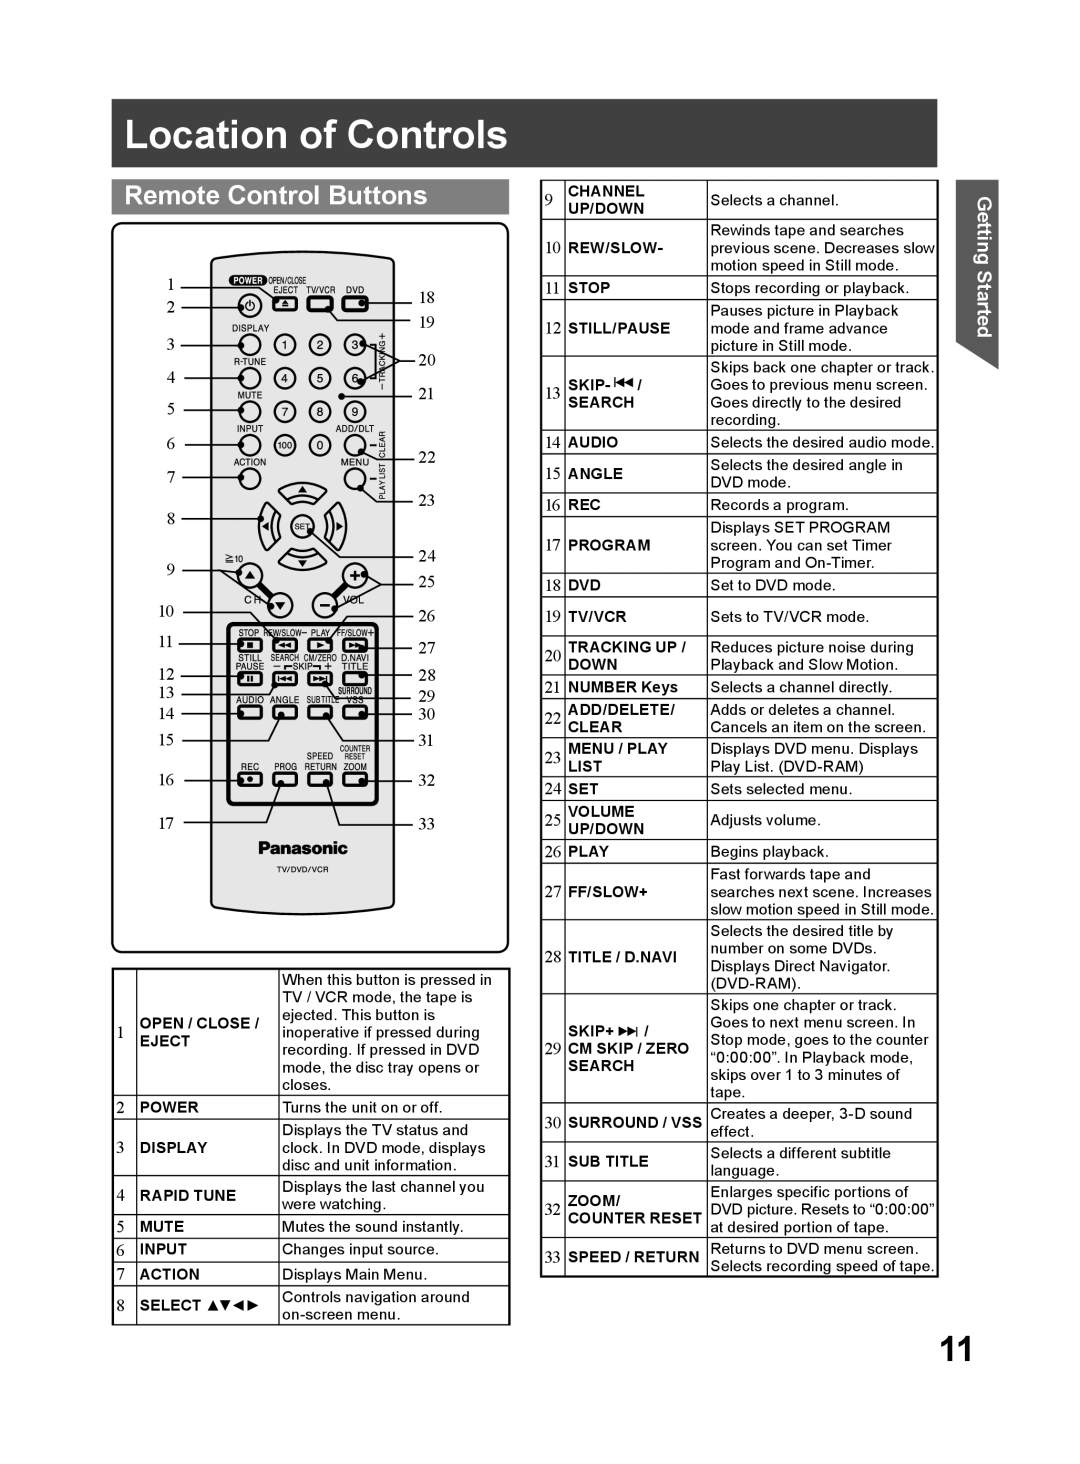 Panasonic PV DF2704, PV DF2004 manual Location of Controls, Remote Control Buttons, Getting Started 